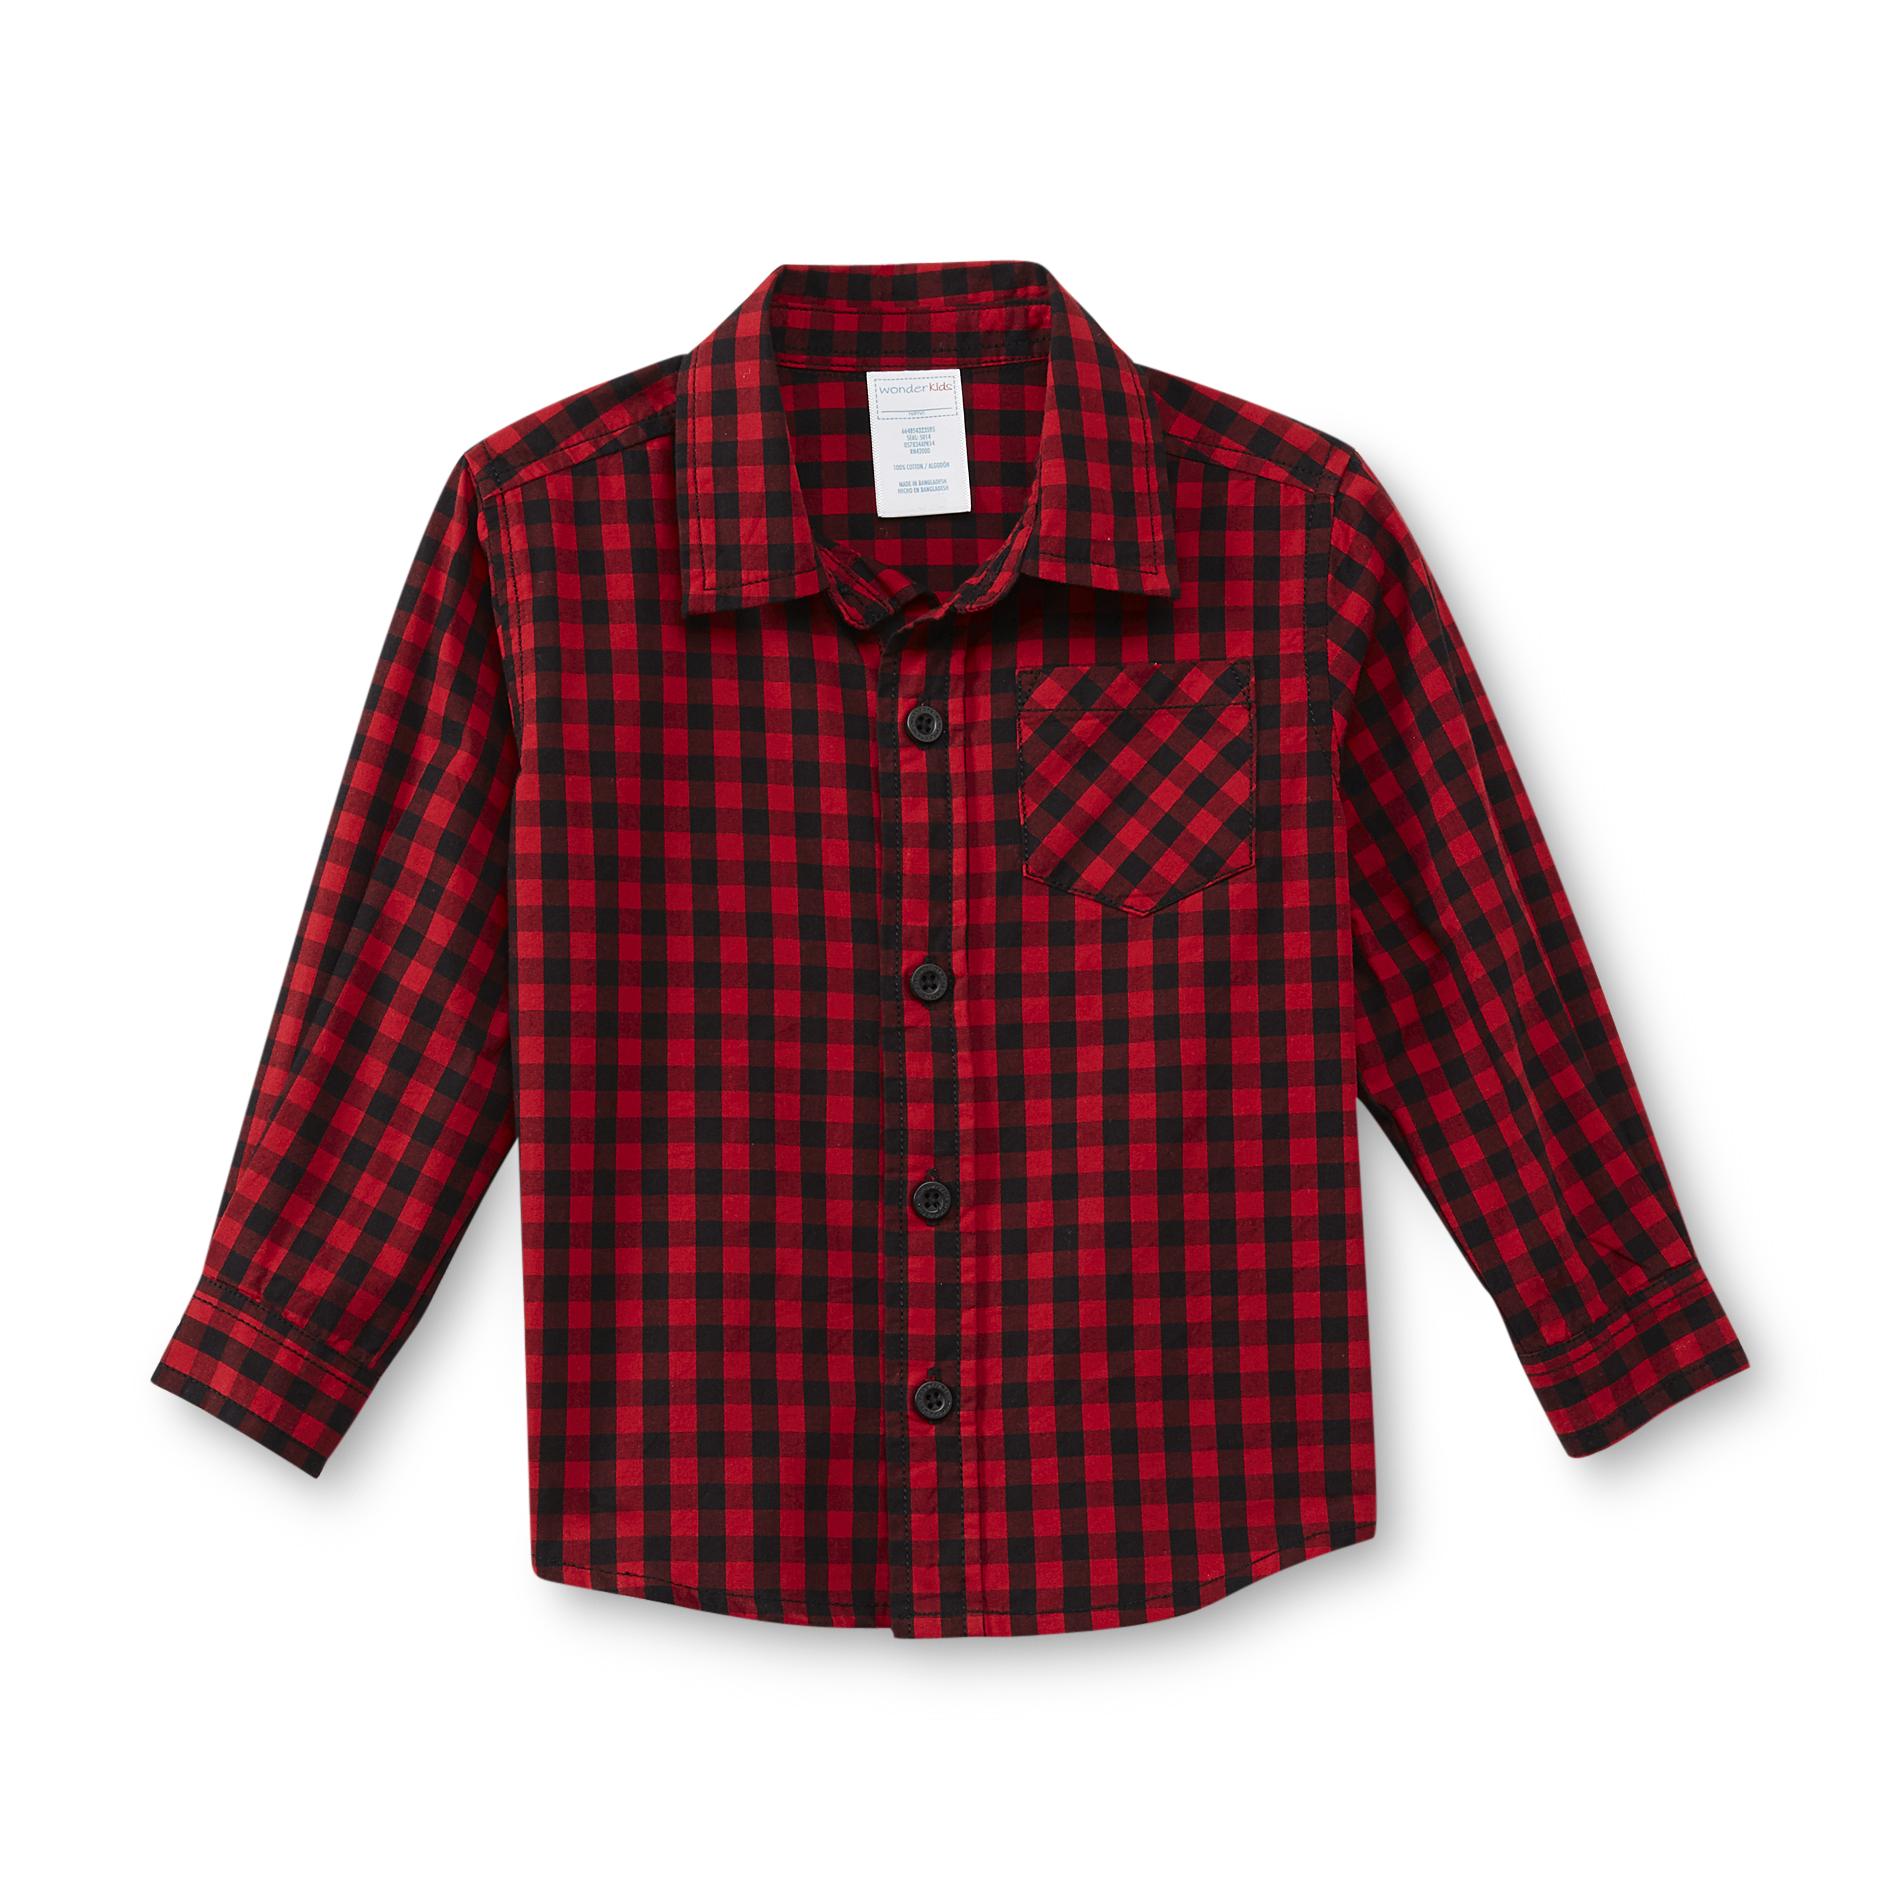 Holiday Editions Infant & Toddler Boy's Button-Front Shirt - Buffalo Plaid